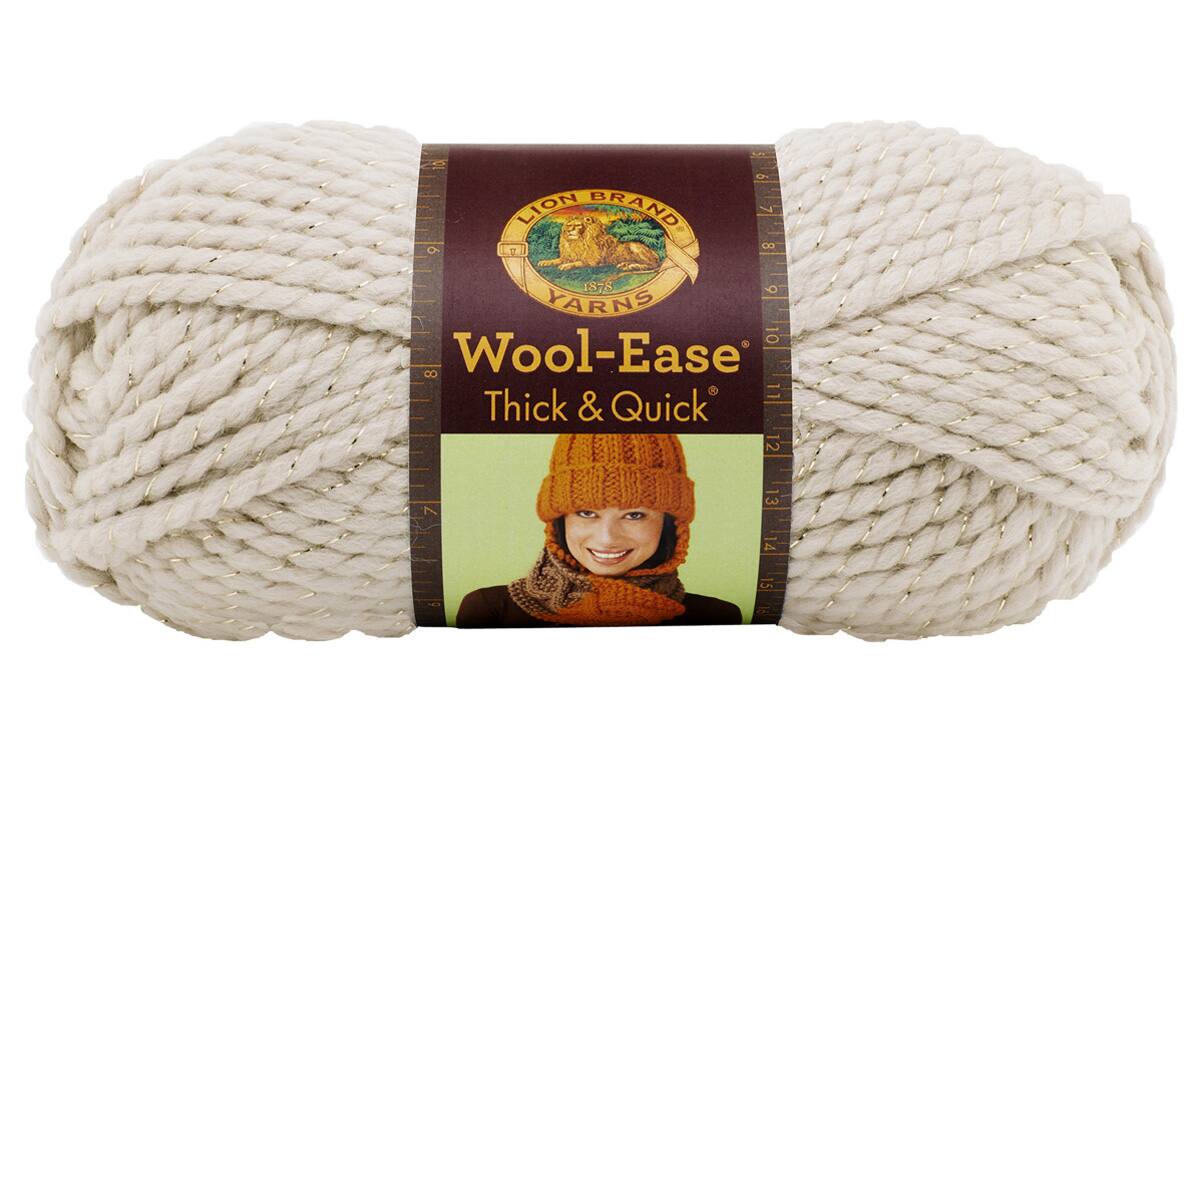 Lion Brand 15 Pack: Lion Brand Wool-Ease Thick & Quick Yarn, Solids